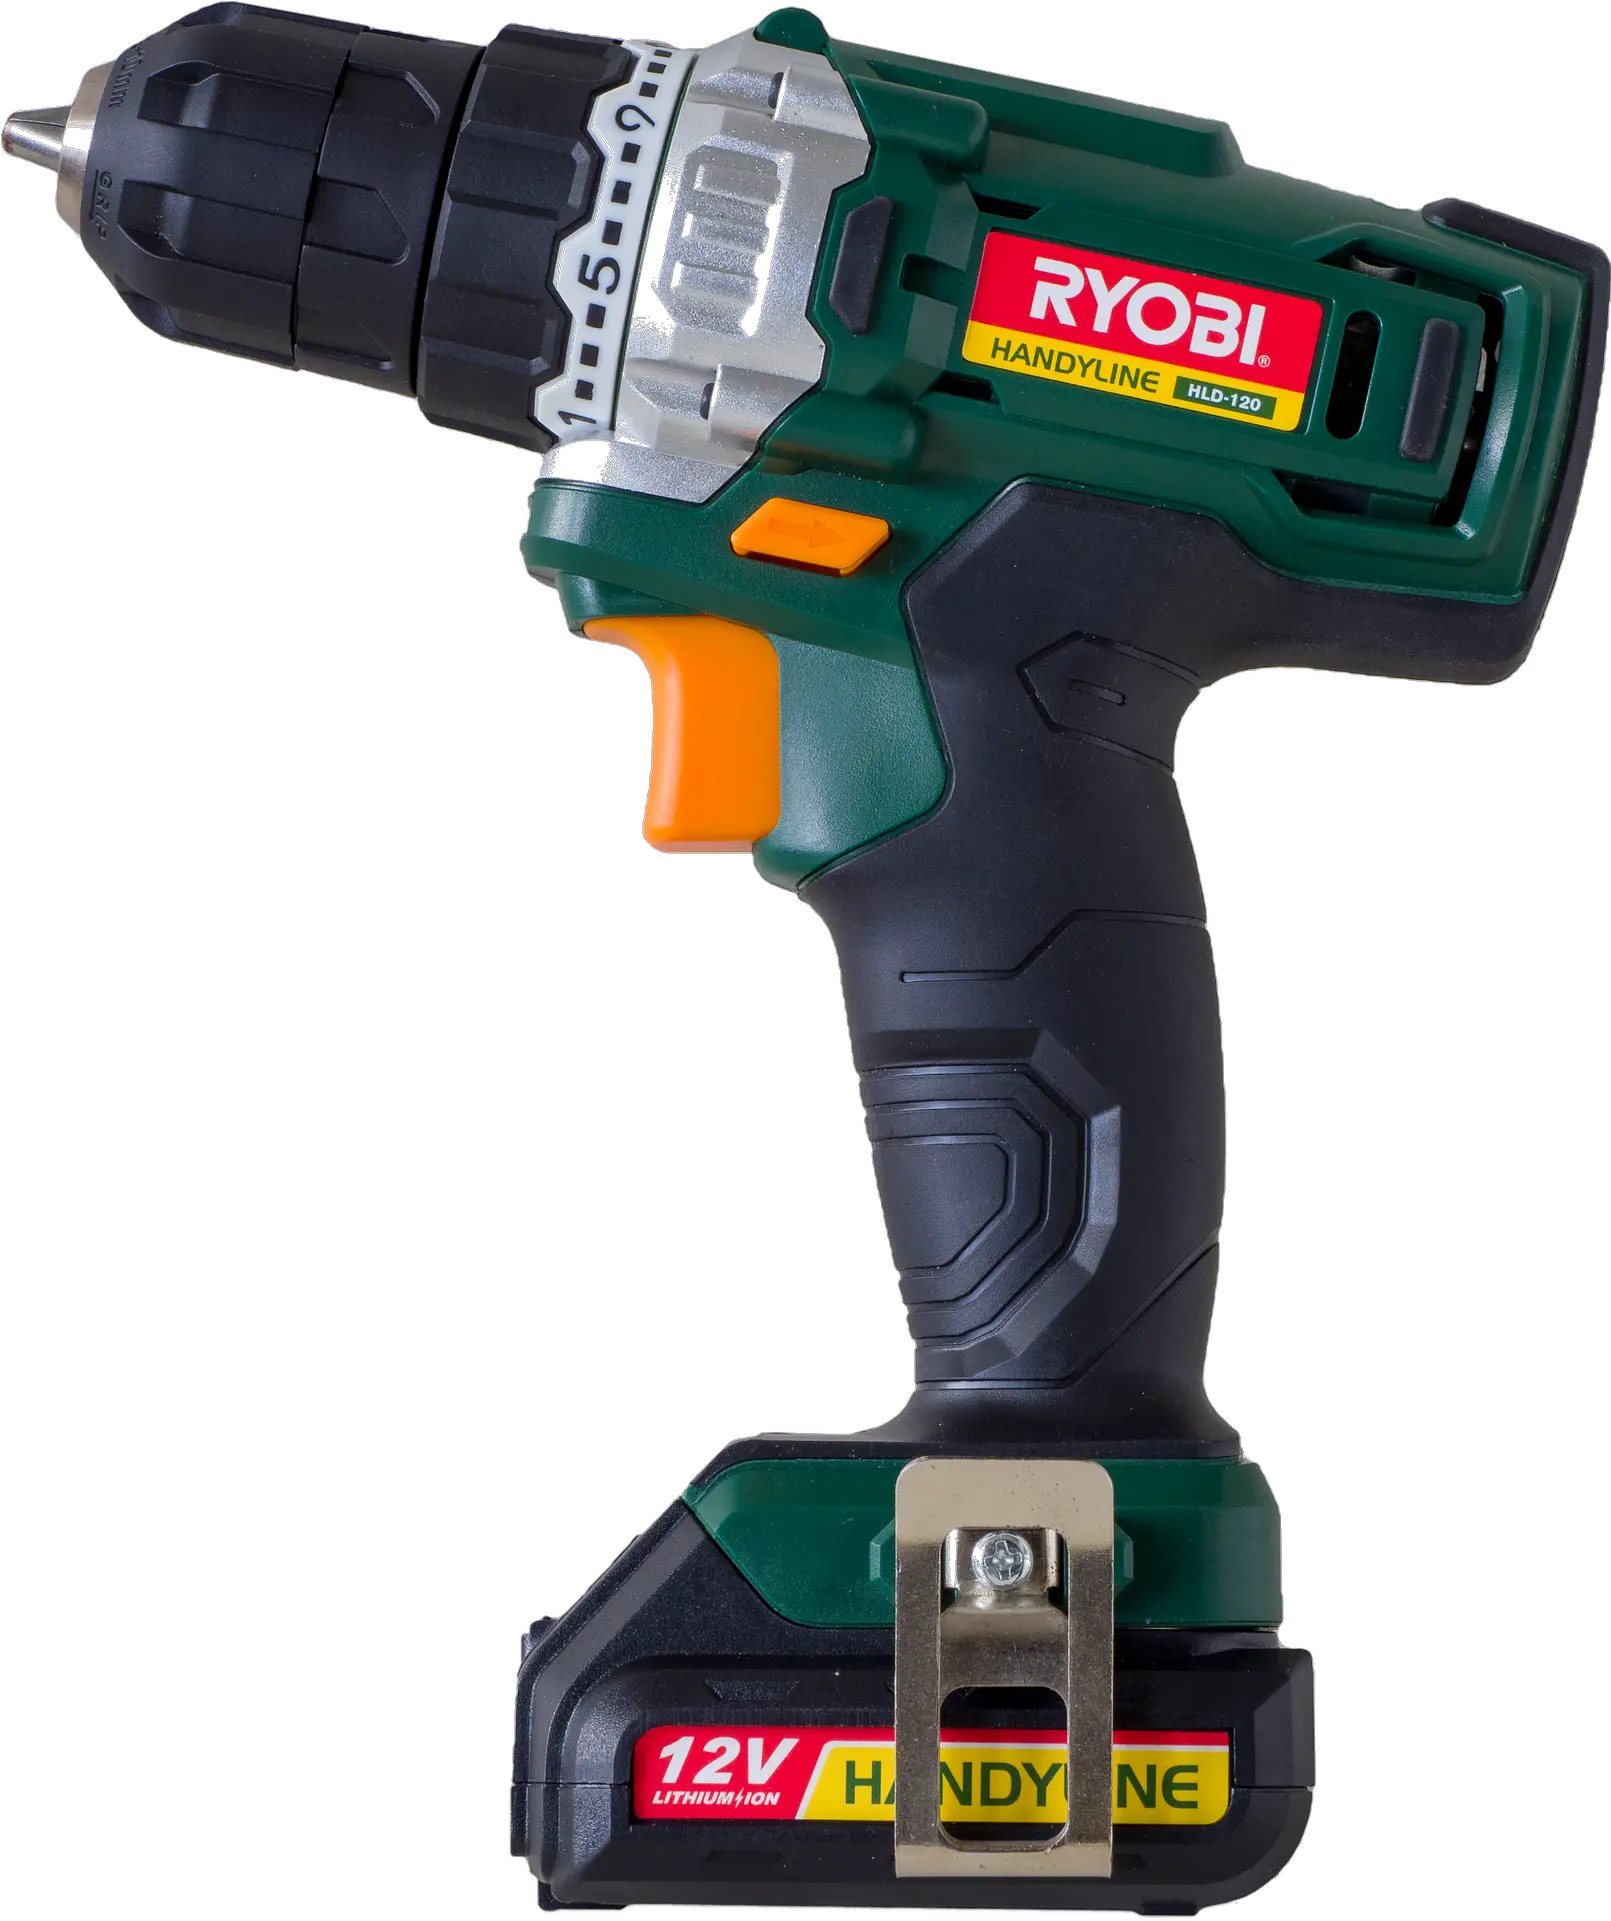 Rockview Investigate Vehicle Theft Battey Drill Transparent Png Drill Png